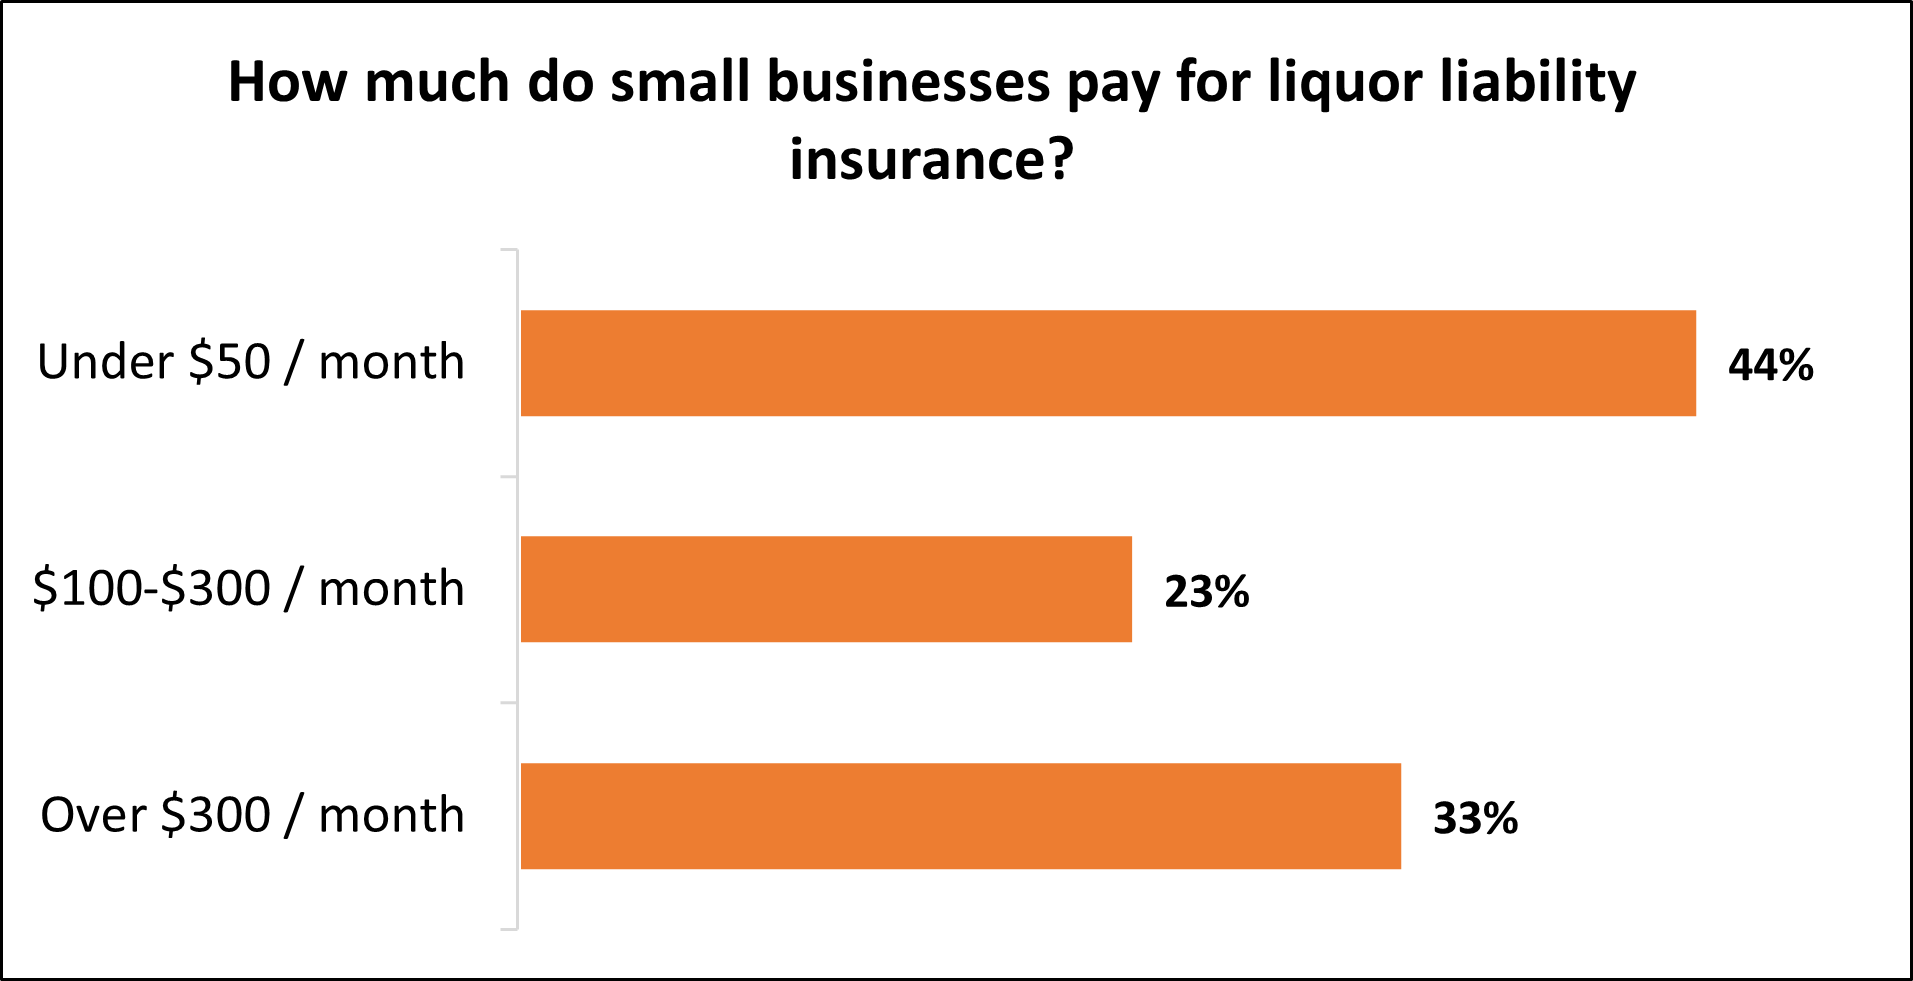 How much do small businesses pay for liquor liability insurance?